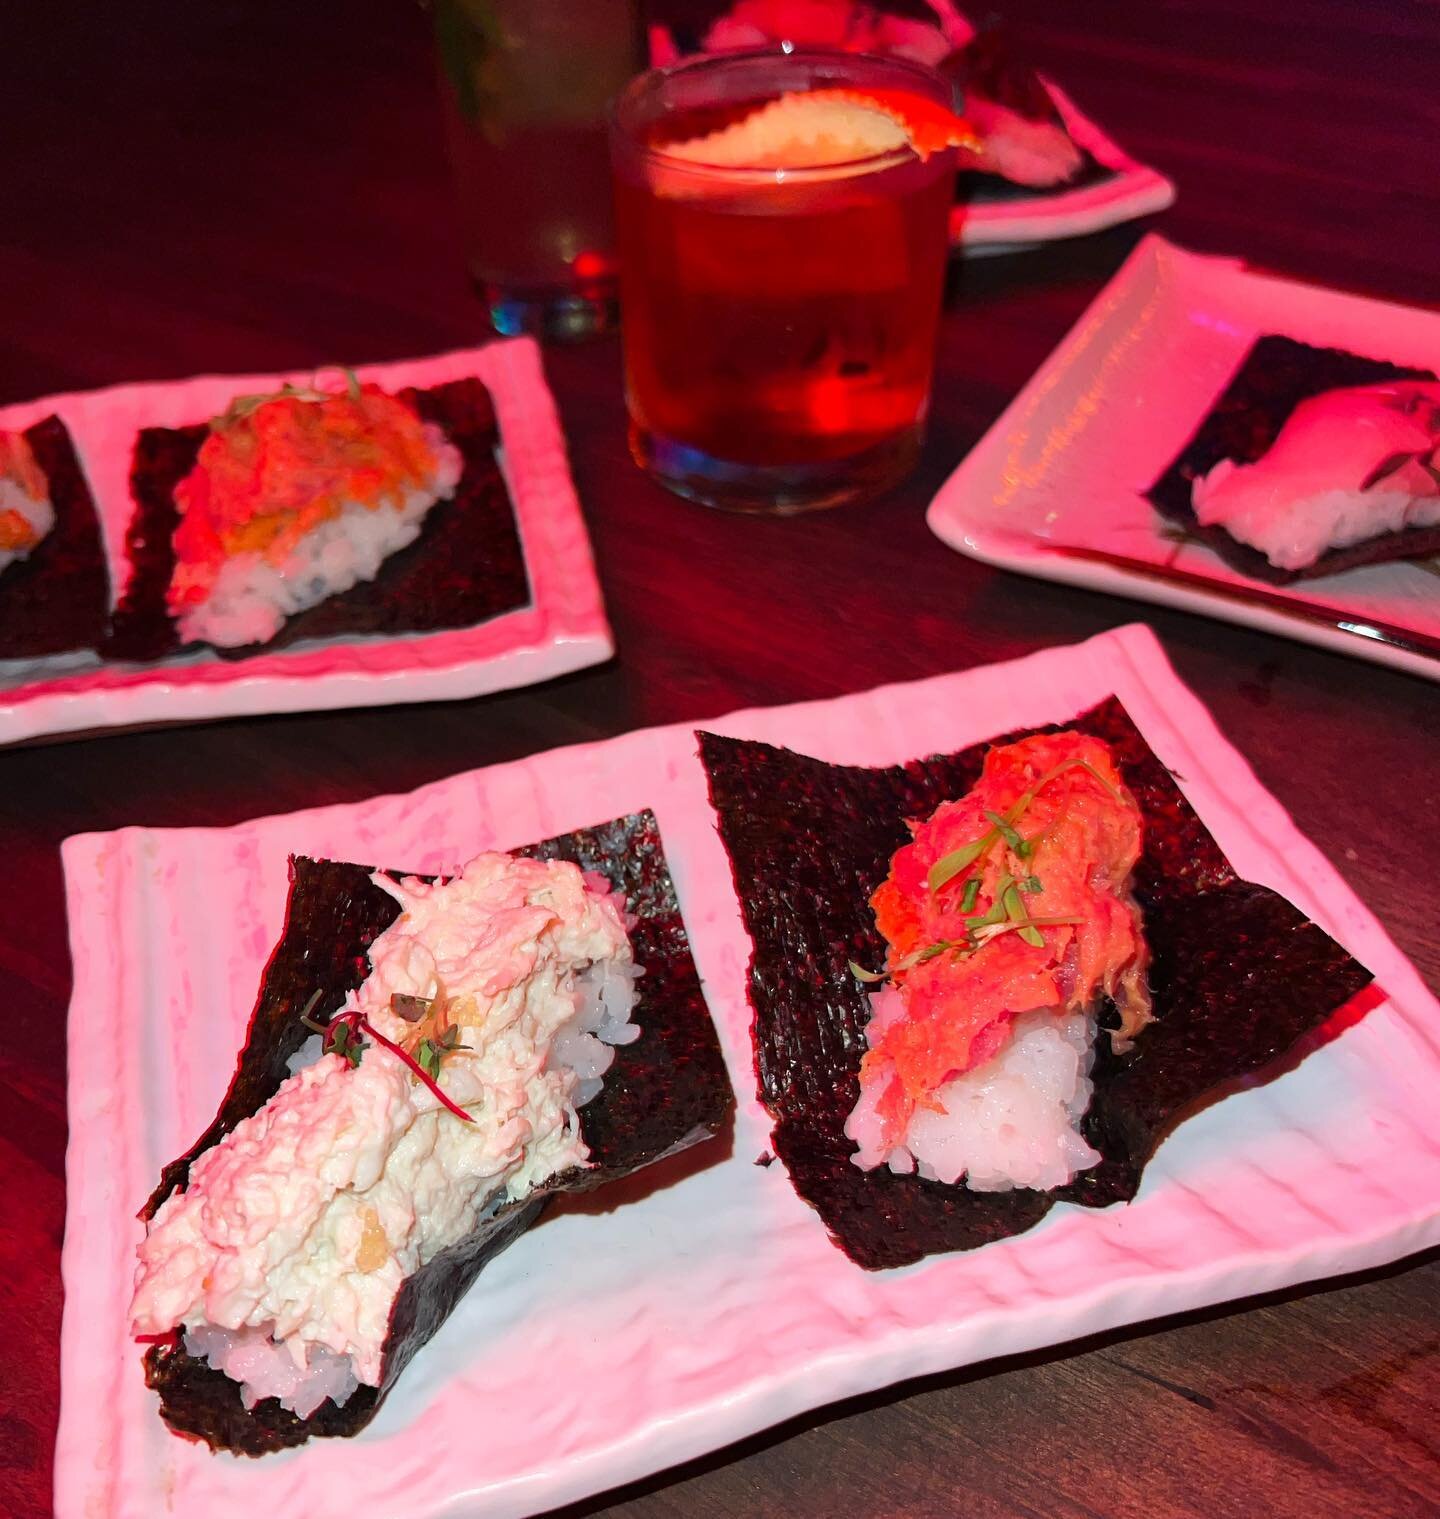 Which HANDROLL is your favorite? We love them all! 🐟 

Full hours below or check us out on the web. Visit our sibling Tiki bar downstairs - The Lost Inferno (@TheLostInfernoOC)!
&bull;
We are currently open Wednesdays to Sundays from 5PM to 11PM/mid